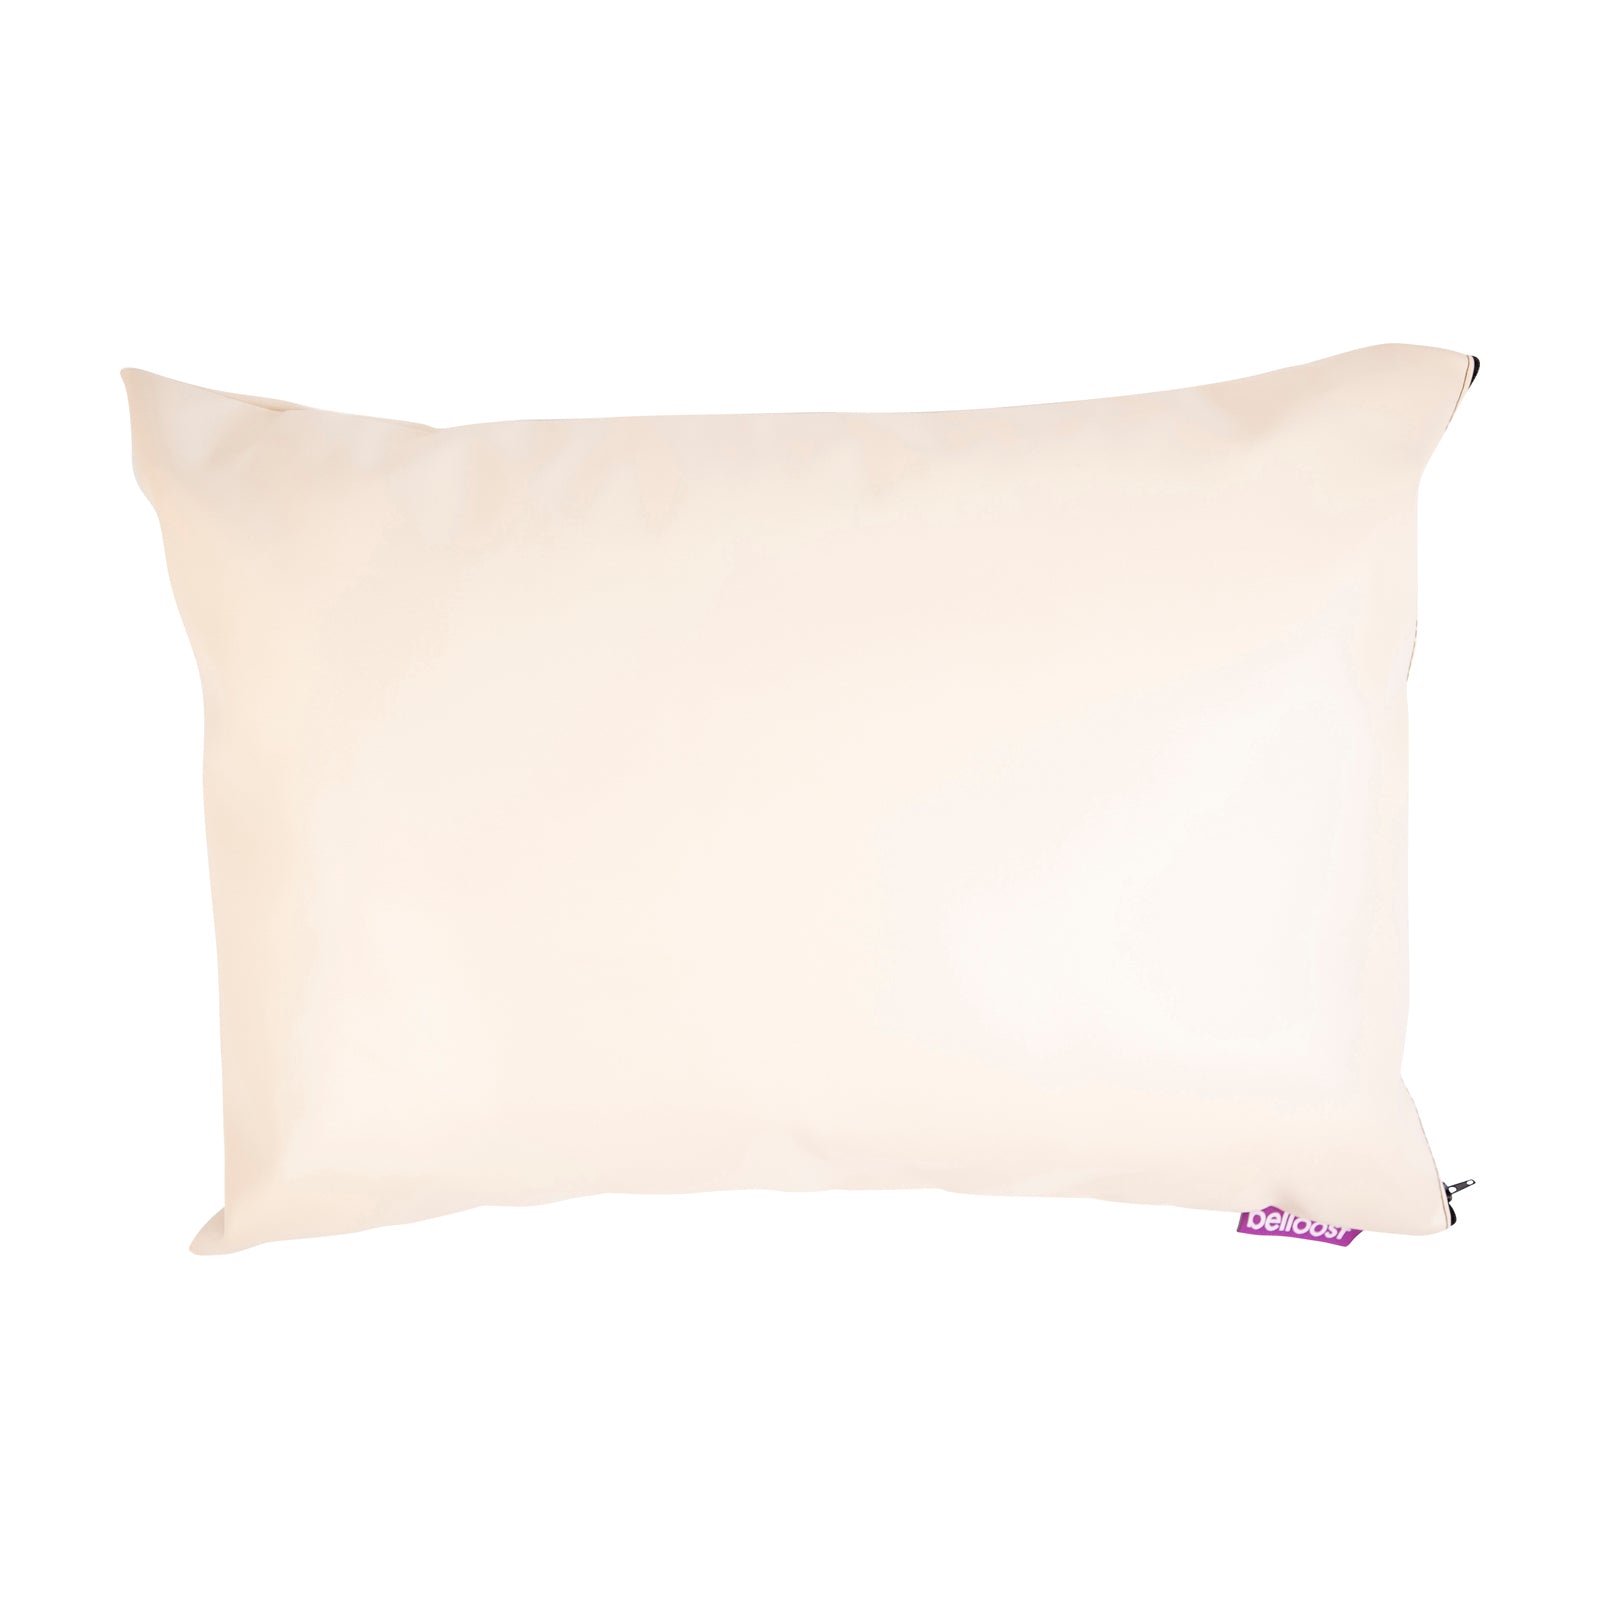 Professional Medical Grade Wipeable Large Rectangle Pillow Cover / Cream - Clearance (On one side only fabric spot 0.5cm, 19cm from top 18cm from side + on other side 1mm wide, 2cm long blue line 34.5cm from top, 13cm from side ) - Belloost®